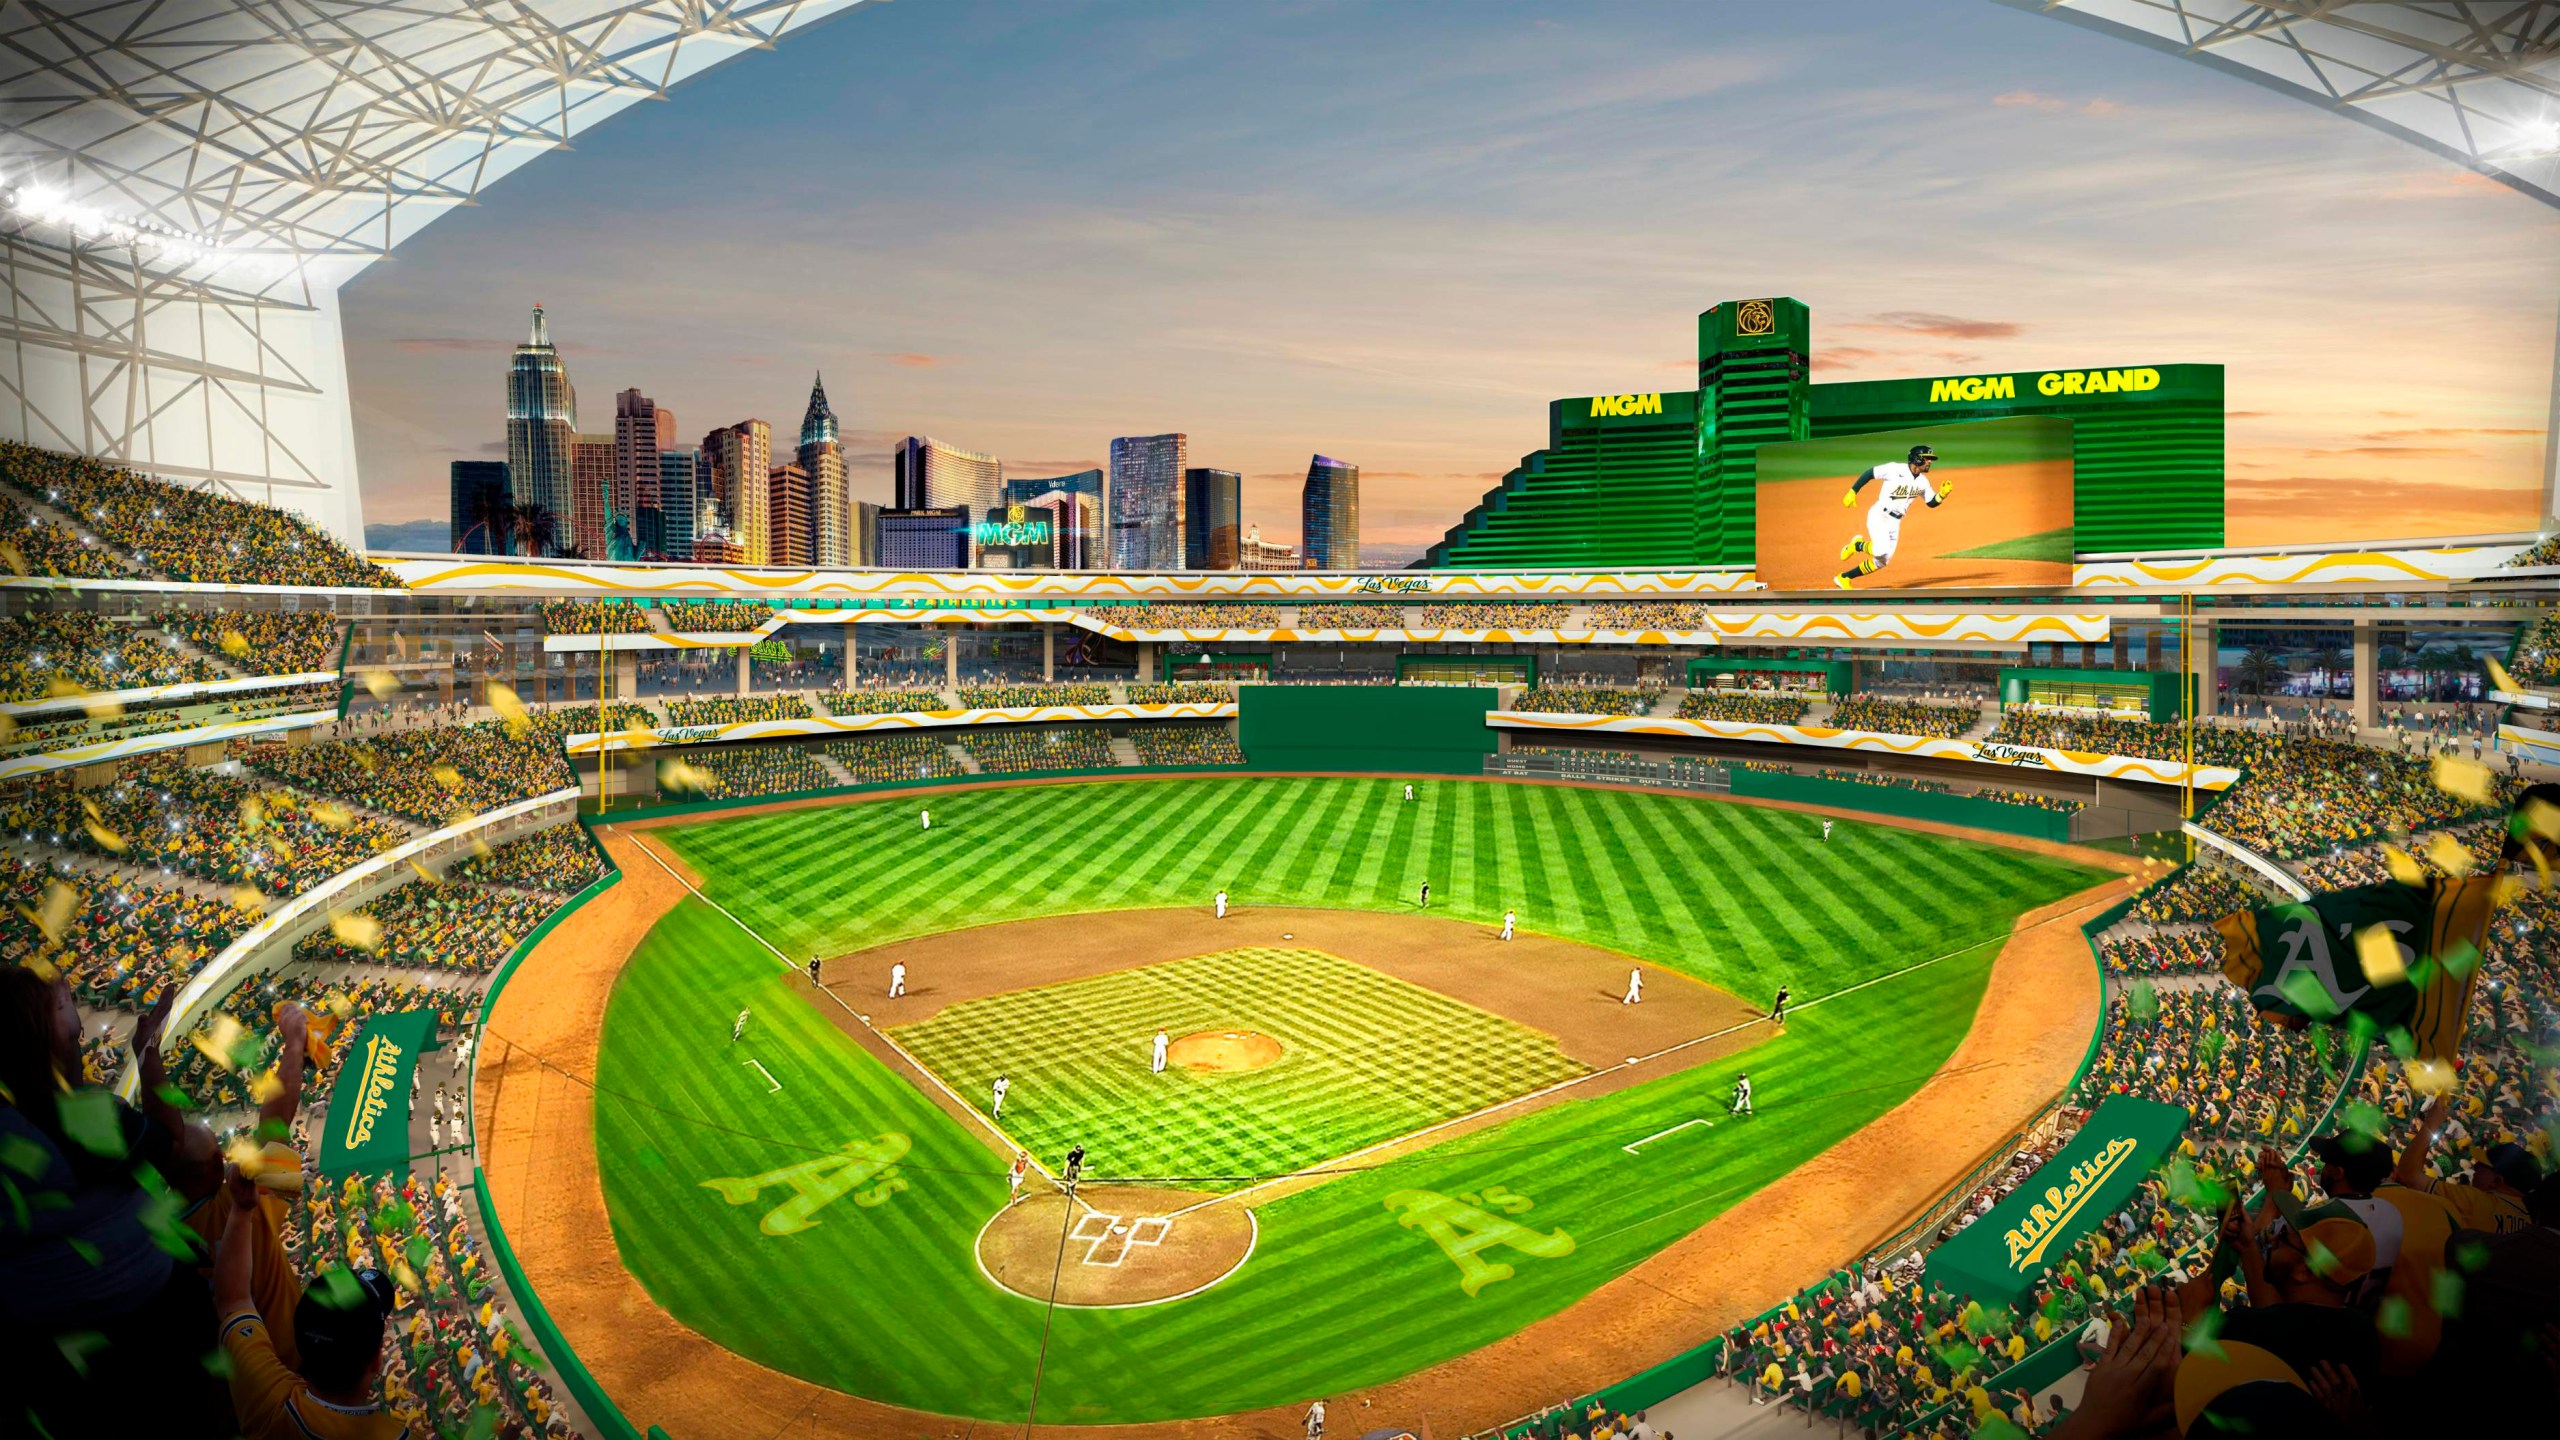 FILE - This rendering provided by the Oakland Athletics on May 26, 2023, shows a view of their proposed new ballpark at the Tropicana site in Las Vegas. The Oakland Athletics cleared a major hurdle for their planned relocation to Las Vegas after the Nevada Legislature gave final approval on Wednesday, June 14, to public funding for a portion of the proposed $1.5 billion stadium with a retractable roof. (Courtesy of Oakland Athletics via AP, File)